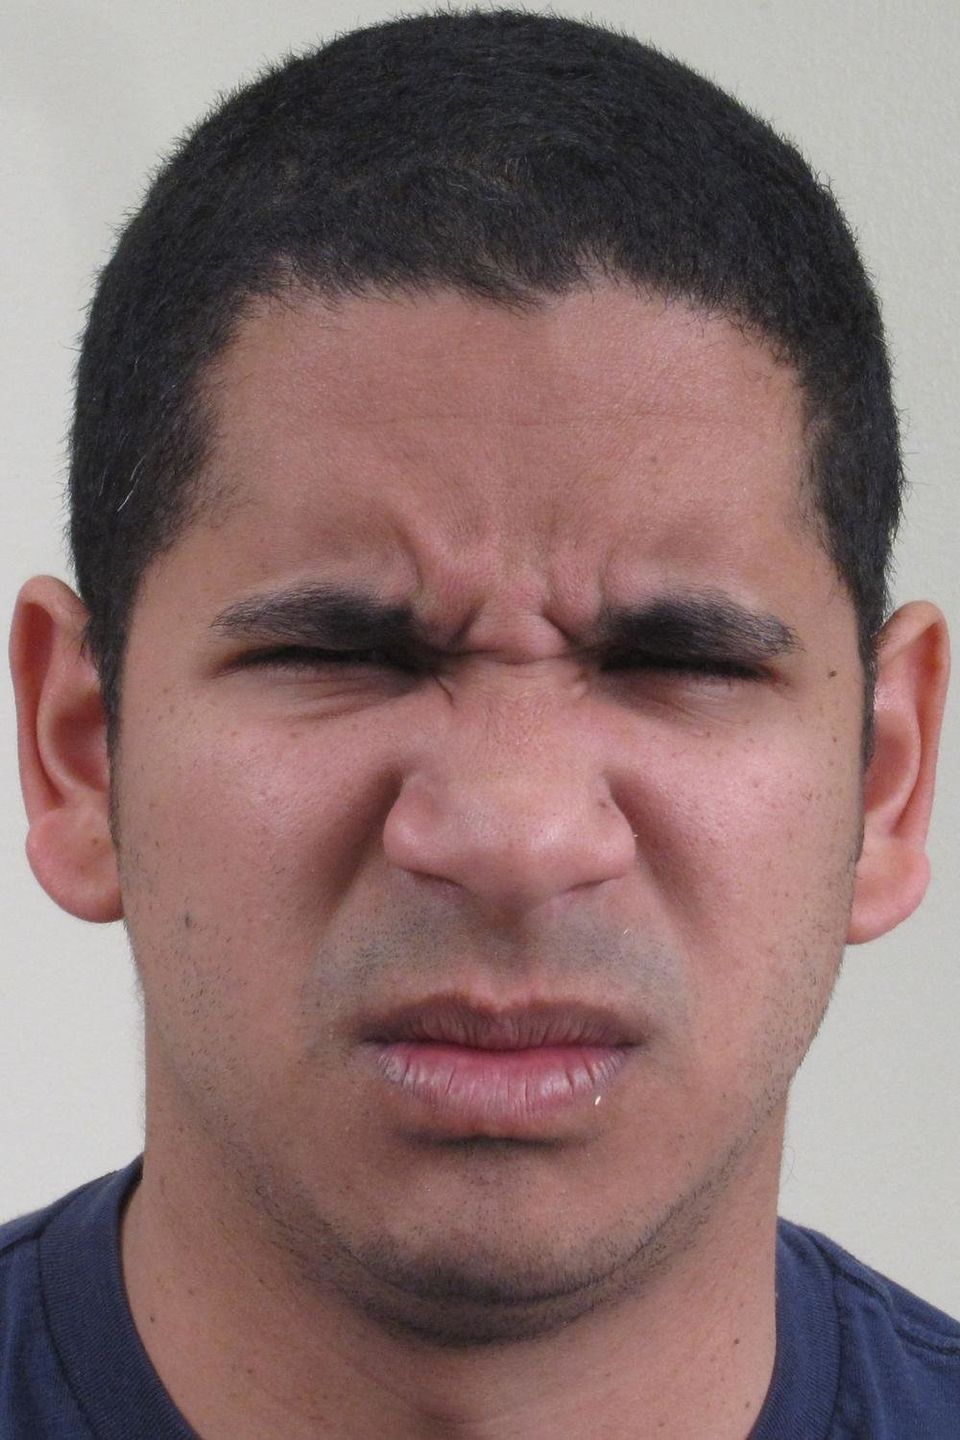 Can YOU identify this facial expression?